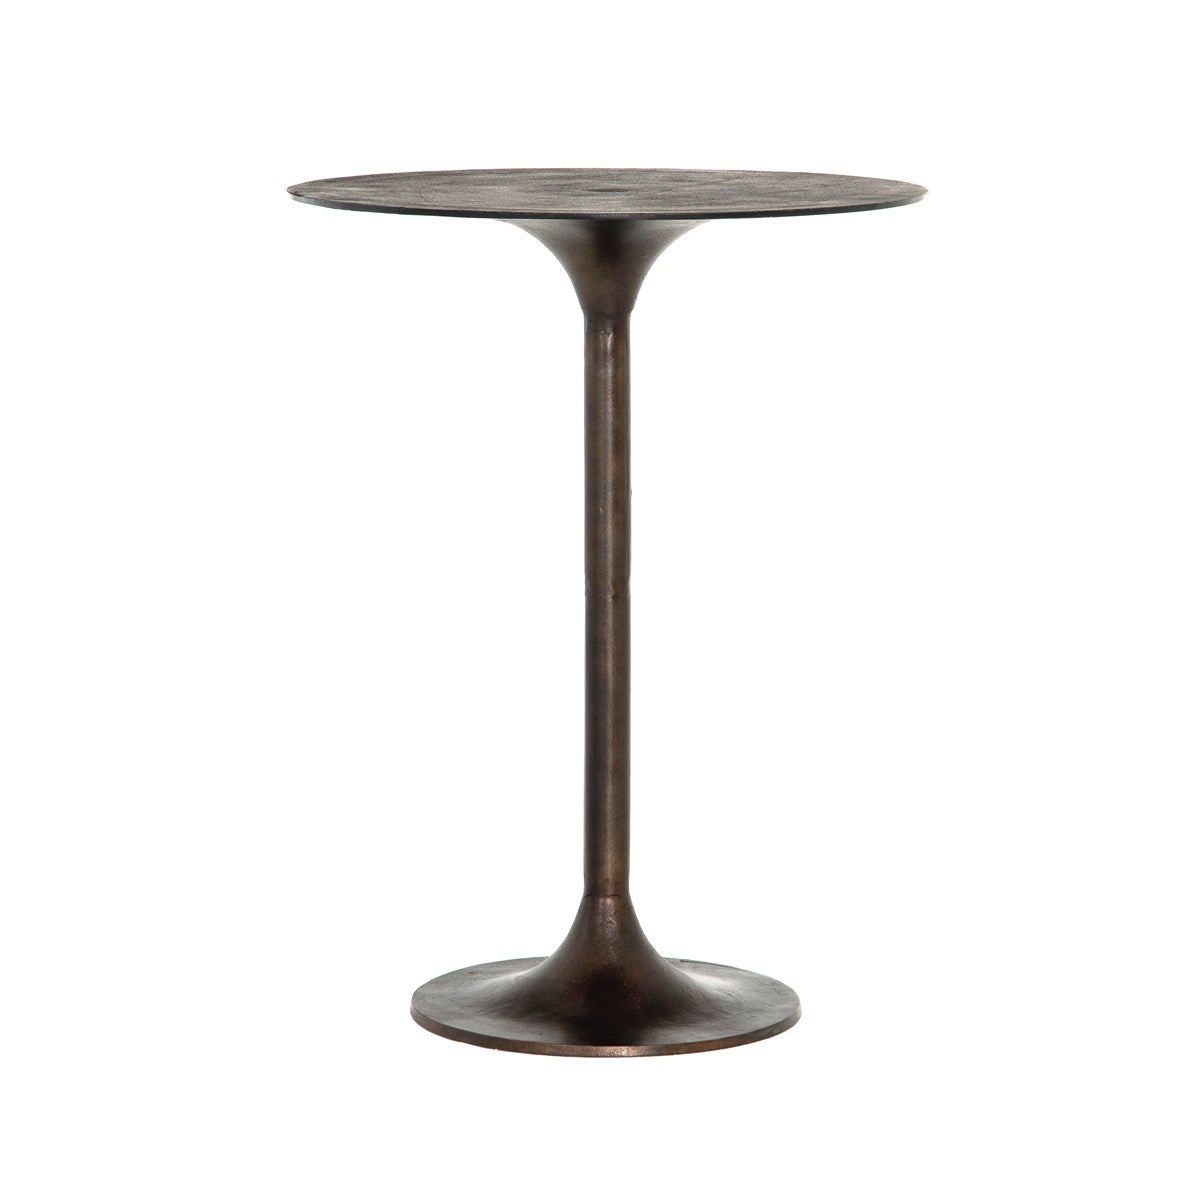 Load image into Gallery viewer, Simone Bar + Counter Table Antique Rust / Bar TableTable Four Hands  Antique Rust Bar Table  Four Hands, Burke Decor, Mid Century Modern Furniture, Old Bones Furniture Company, Old Bones Co, Modern Mid Century, Designer Furniture, https://www.oldbonesco.com/
